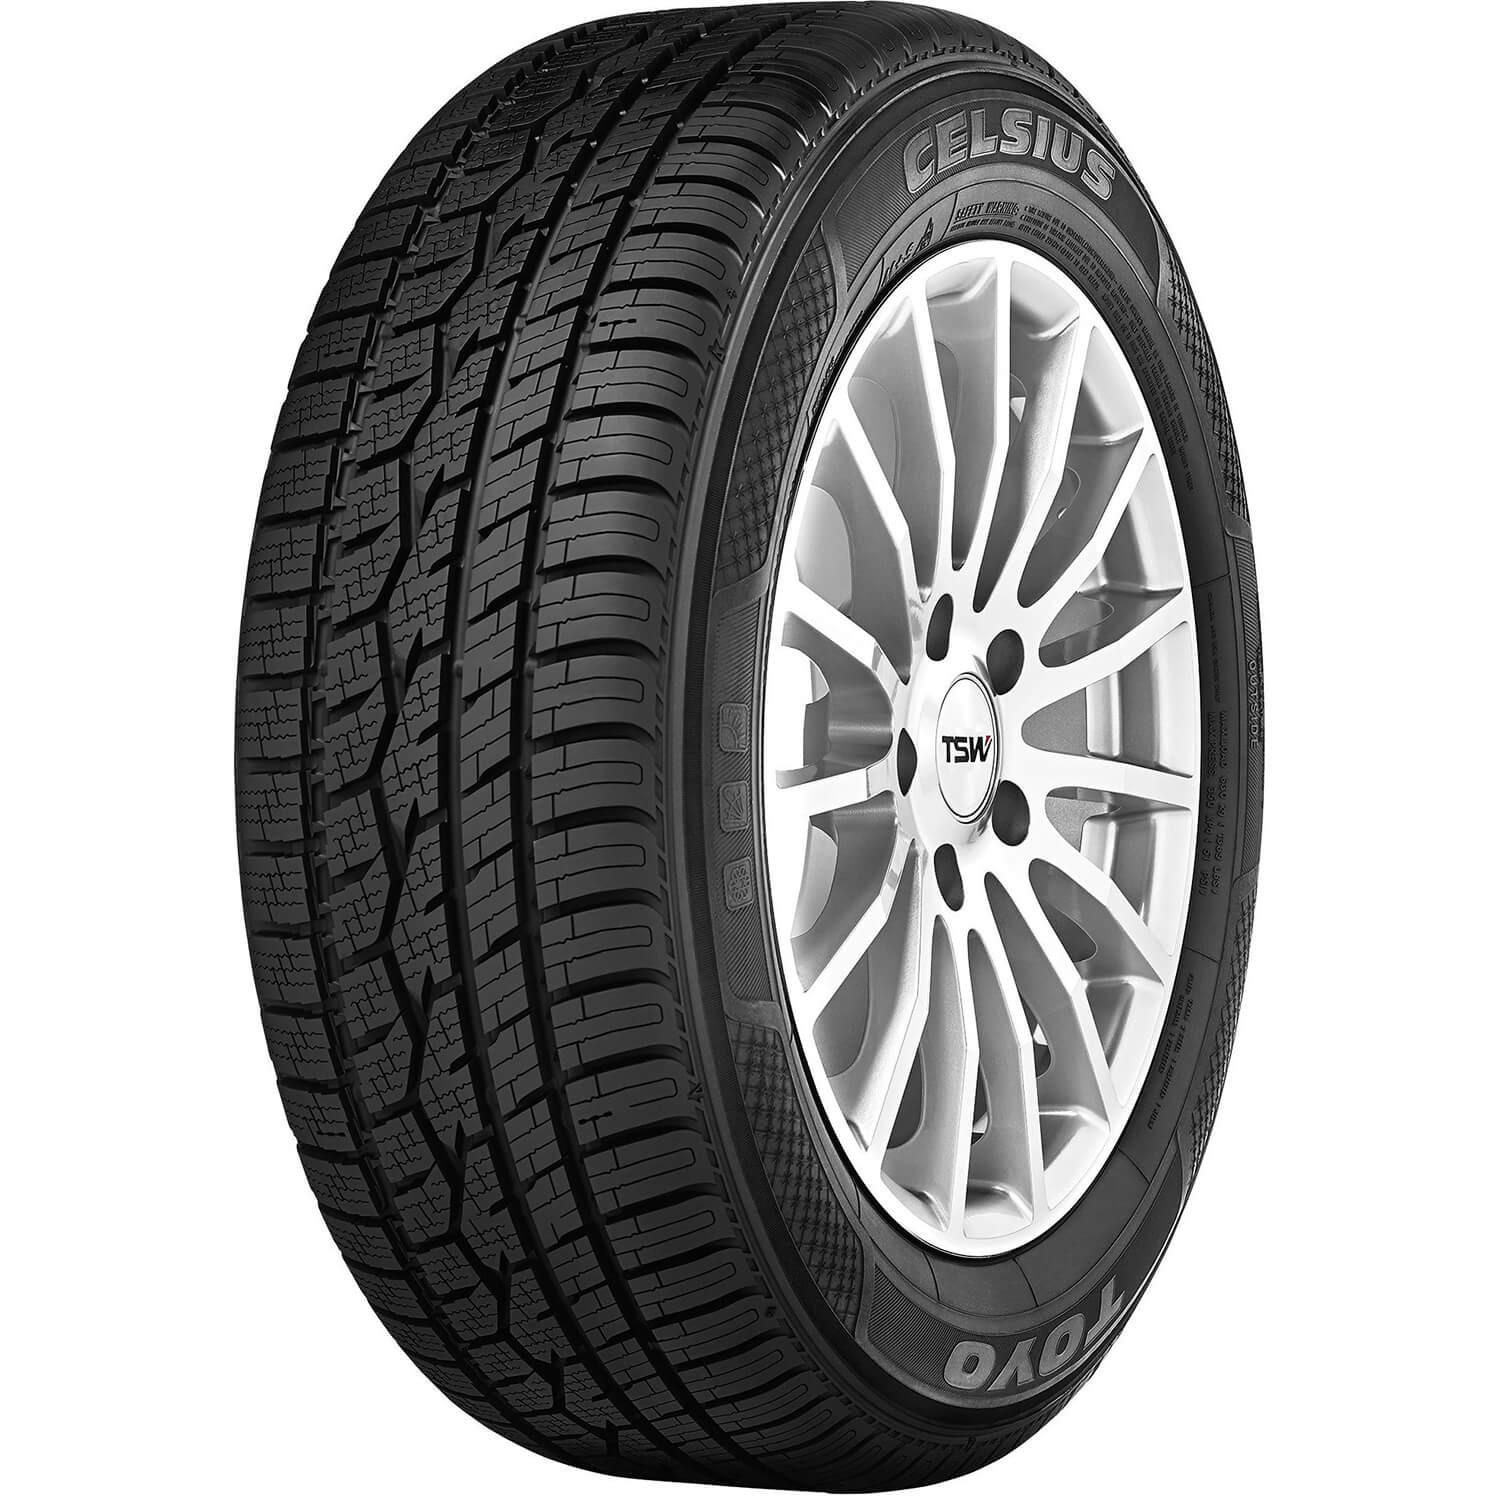 X2 205 55 16 TOYO PROXES COMFORT AMAZING C,A RATED QUALITY TYRES 205/55R16  91V